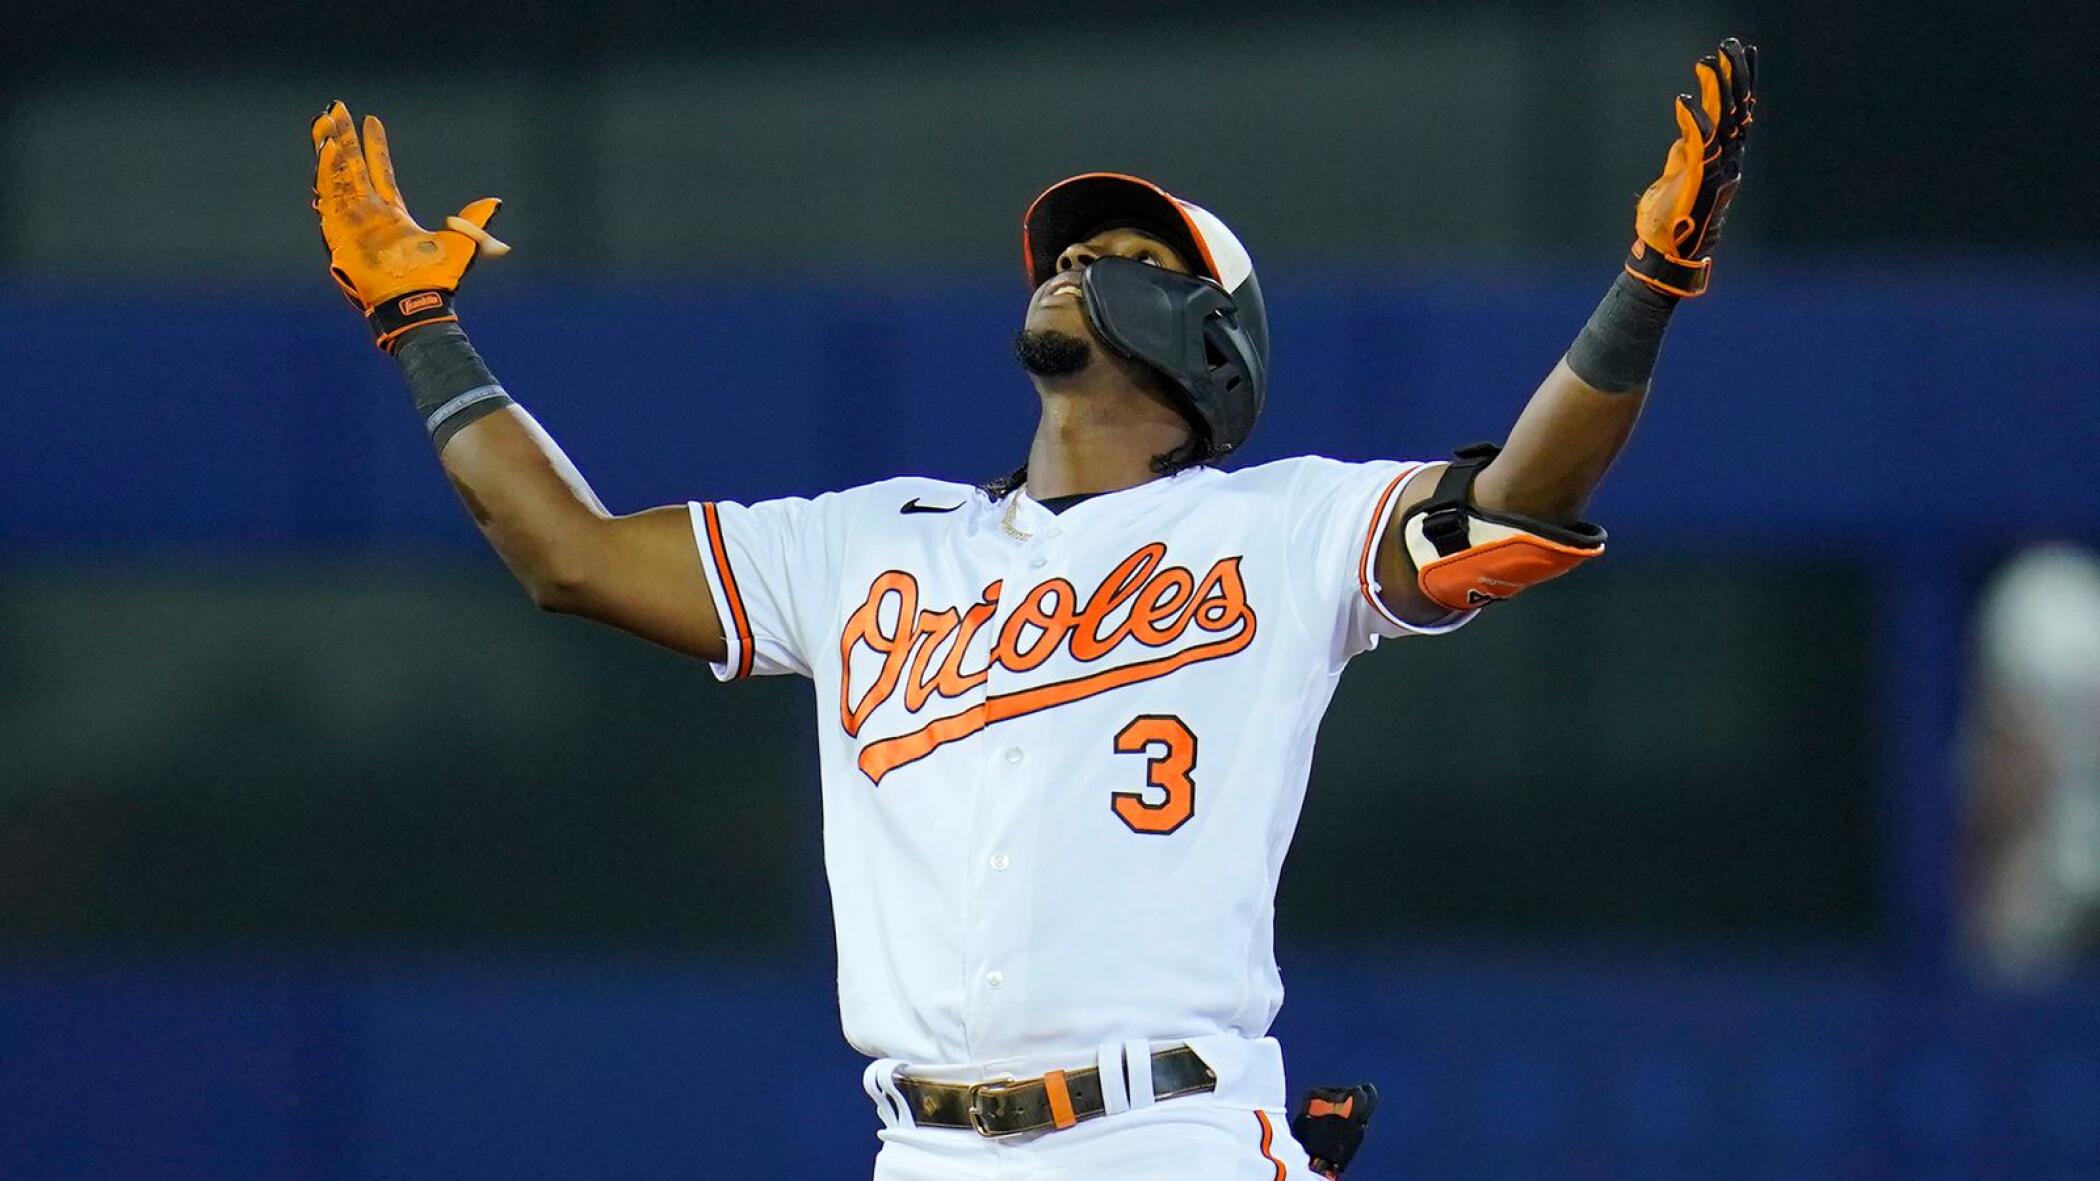 Mateo lifts Orioles past Boston in MLB Little League Classic